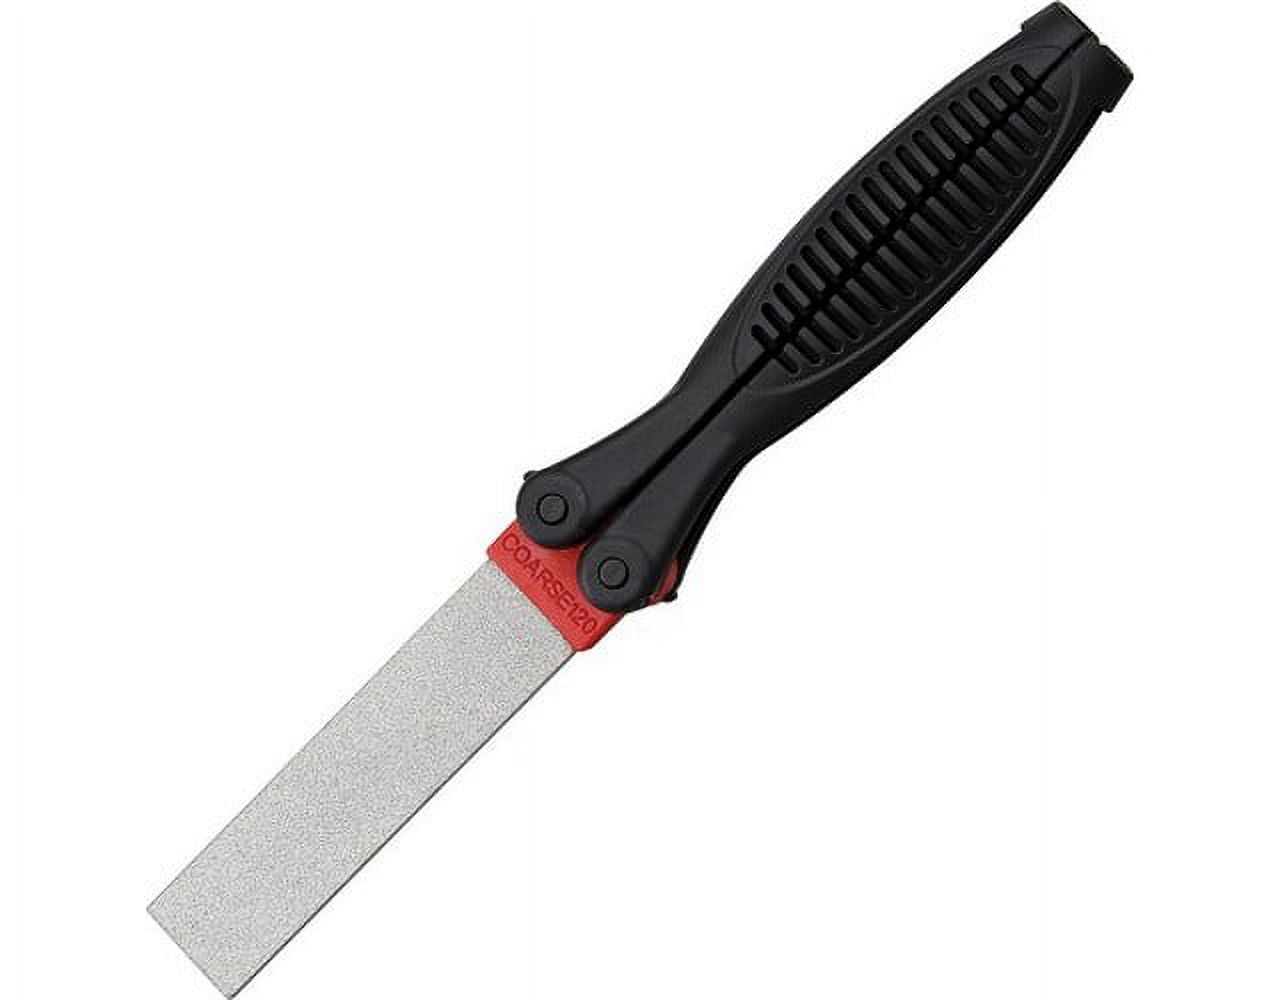 SHARPAL 181N Dual-Grit Diamond Sharpening Stone File with Leather Strop,  Tool Sharpener for Sharpening Knife, Axe, Hatchet, Lawn Mower Blade, Garden  Shears, Chisels, Spade, Drills and All Blade Edge 